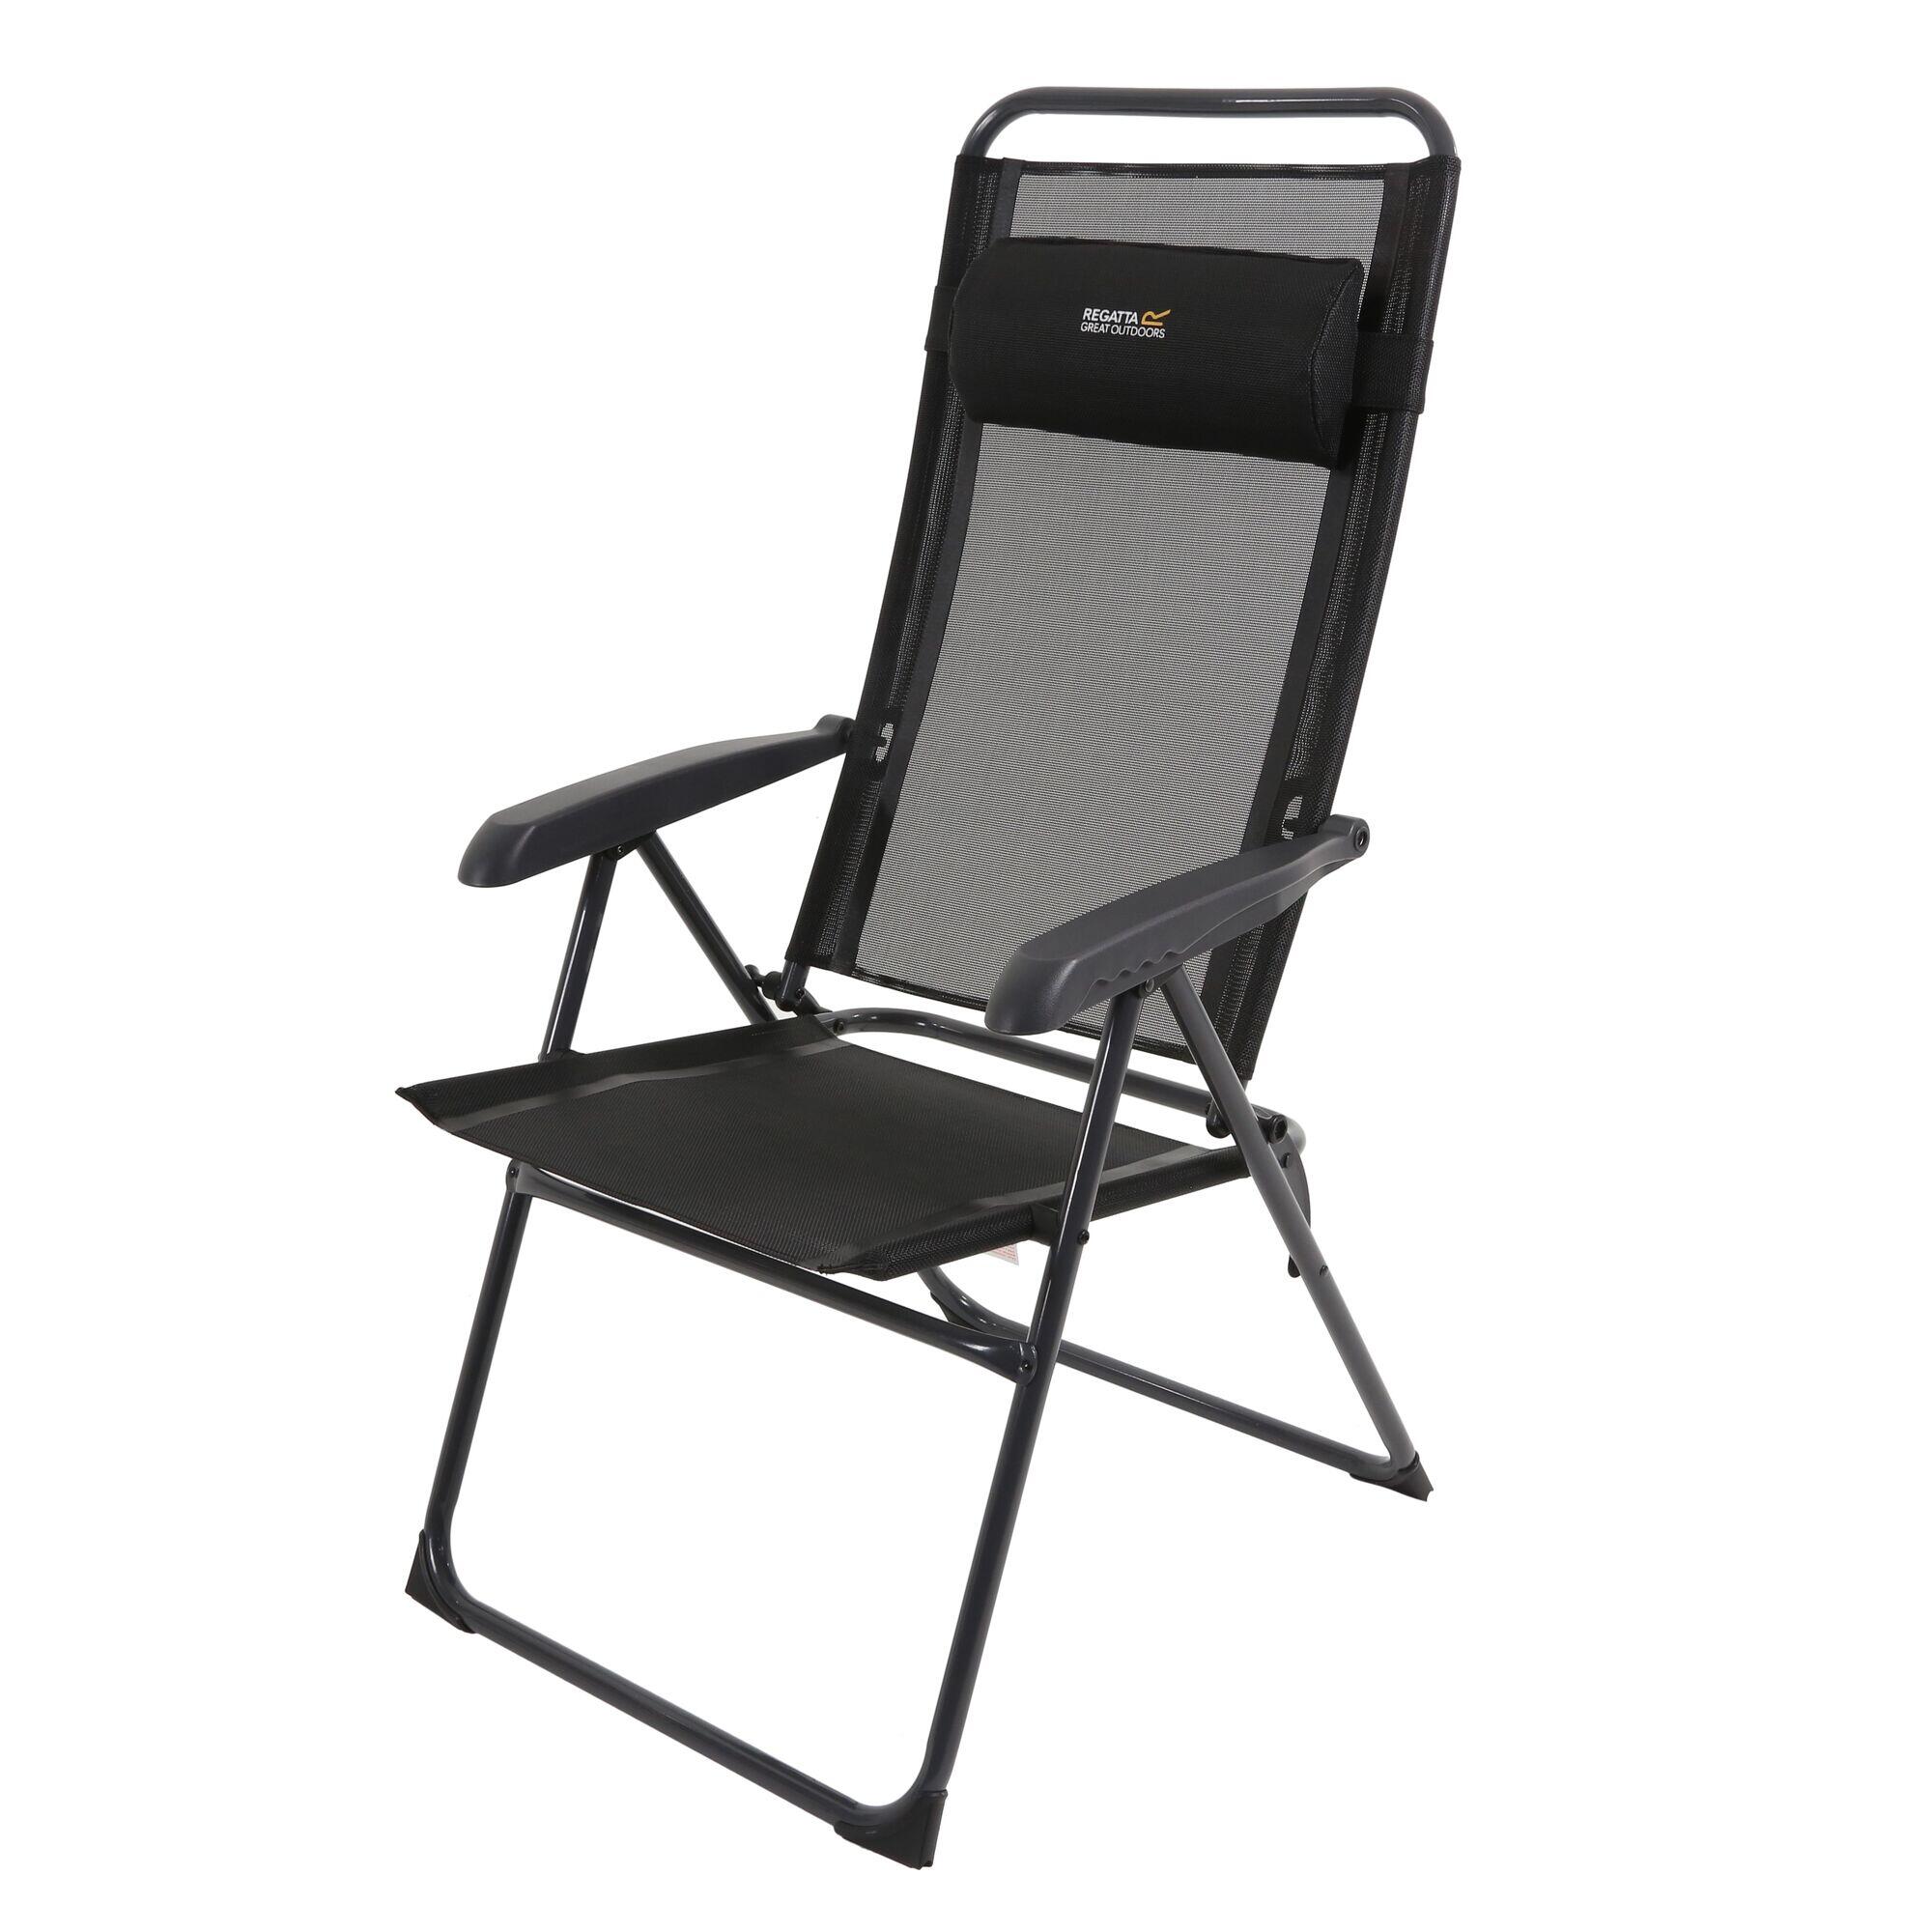 Colico Adults' Camping Chair - Black 1/5